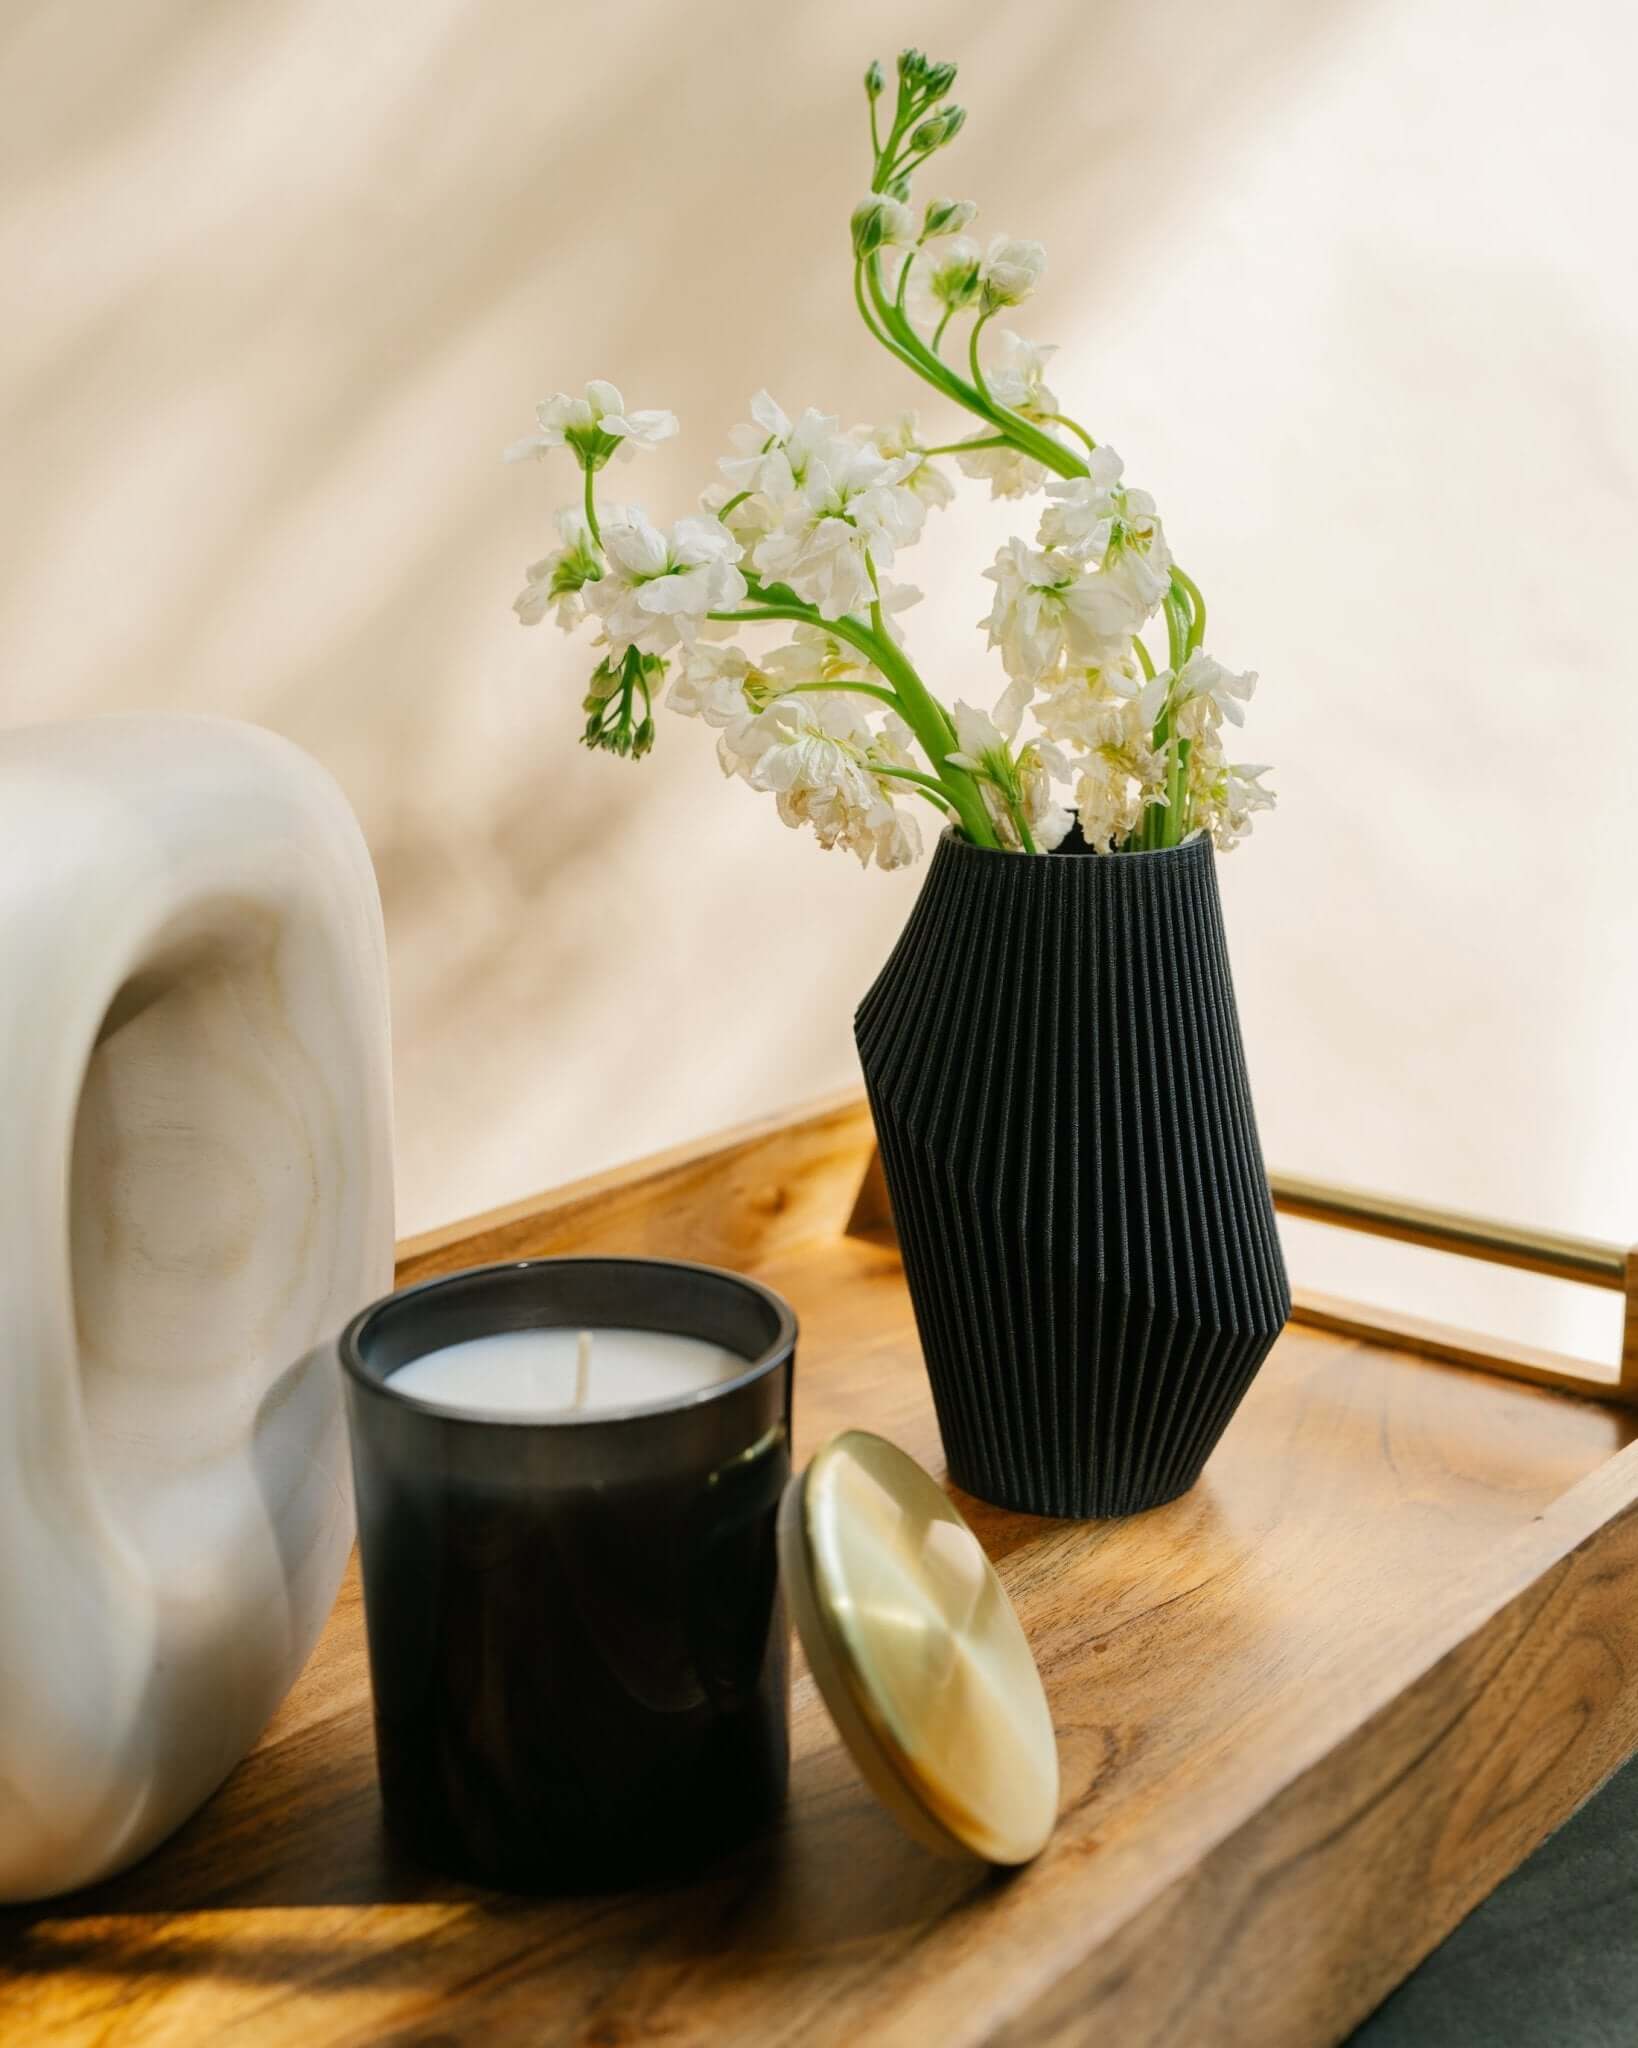 A black small vase with flowers next to a candle.